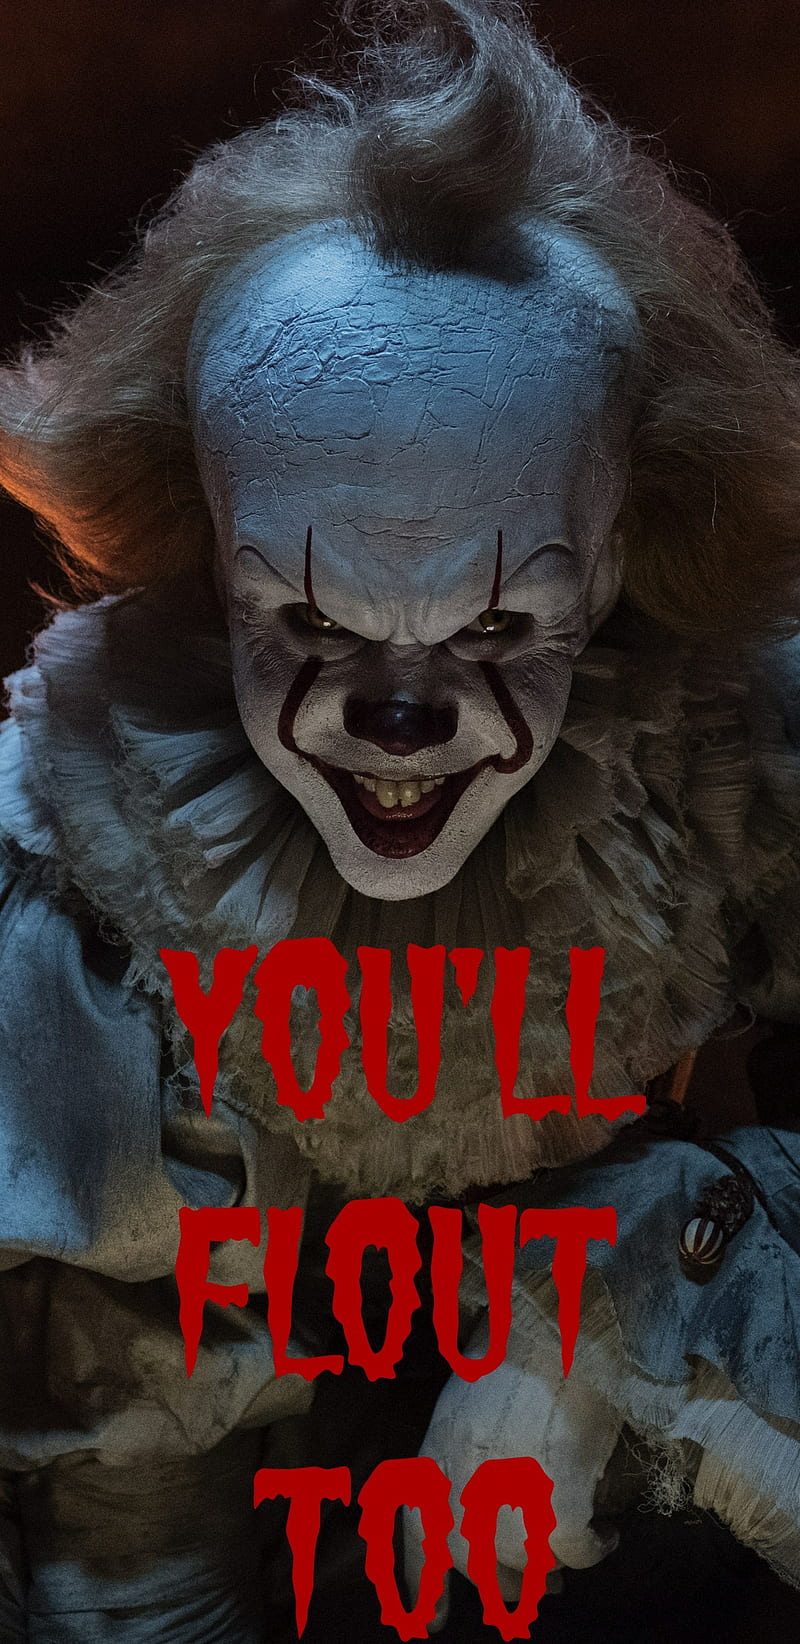 IT, clown, creepy, halloween, lockscreen, pennywise youllfloutto, HD phone wallpaper